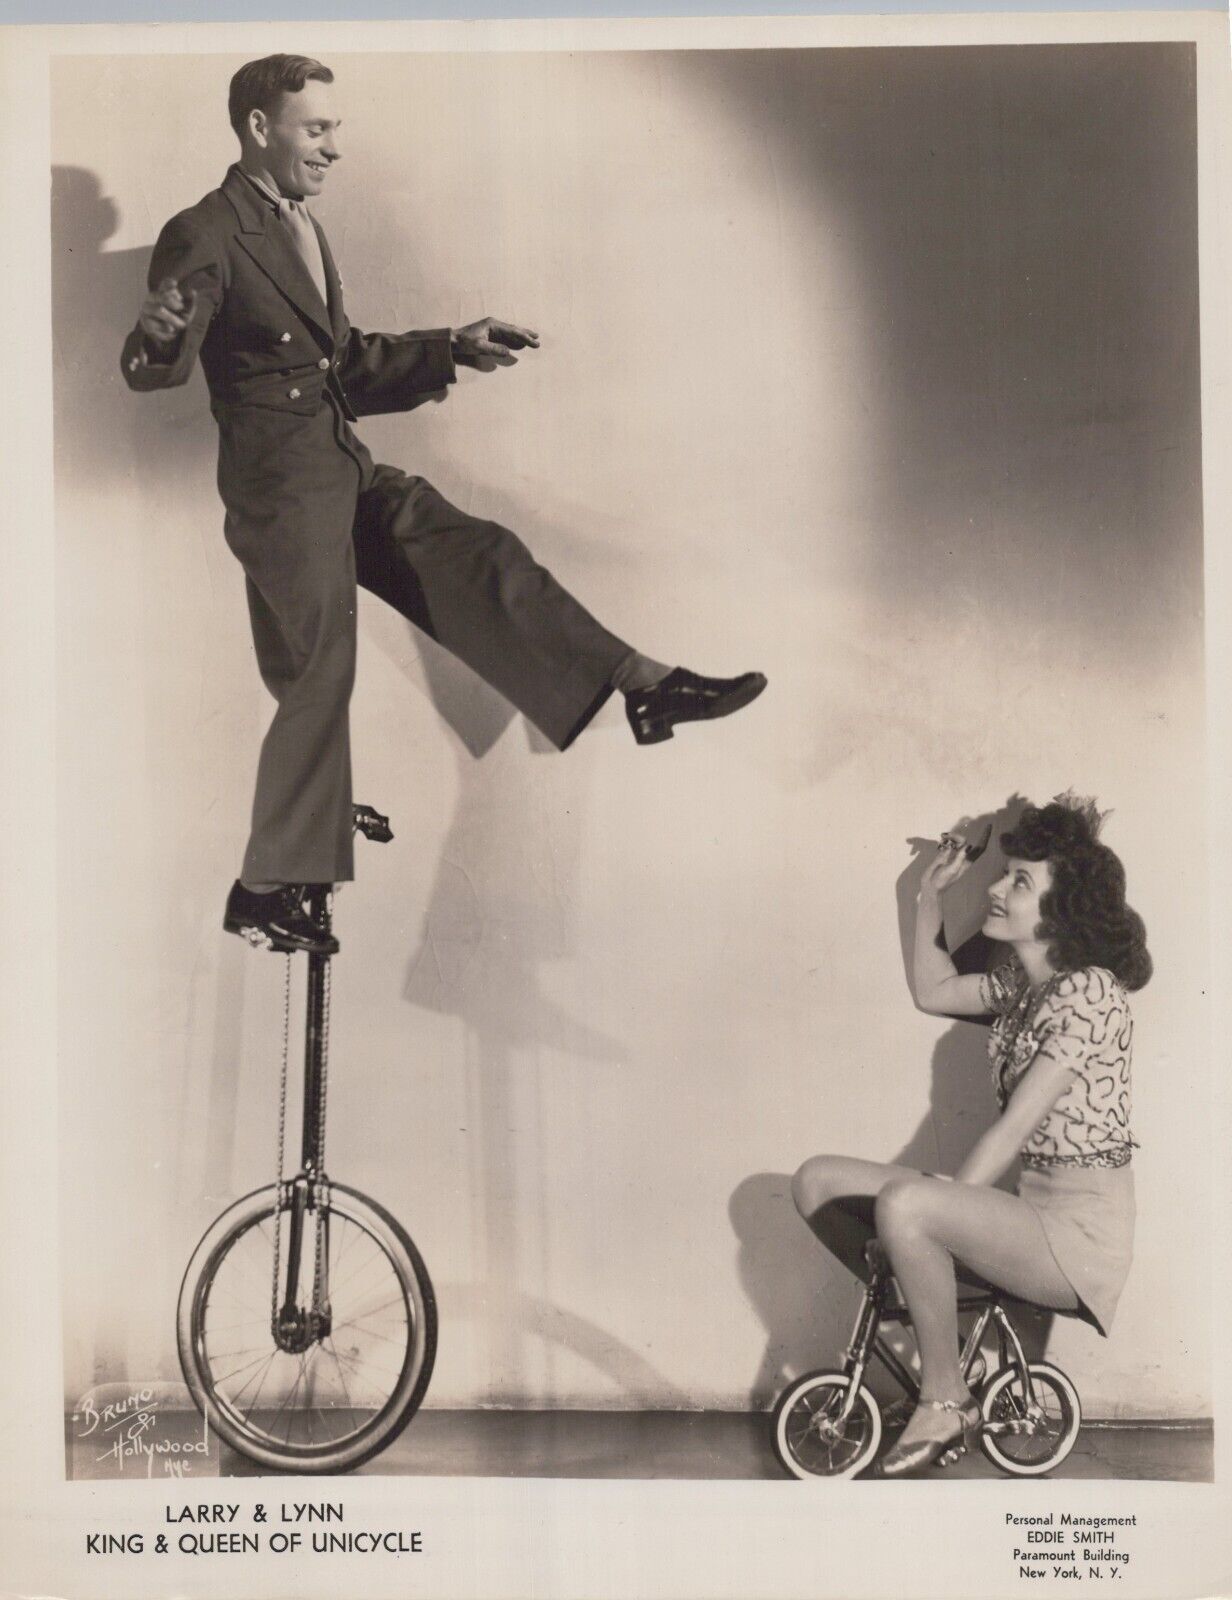 Larry & Lynn - King & Queen of Unicycle (1940s) ❤ Paramount Photo K 405